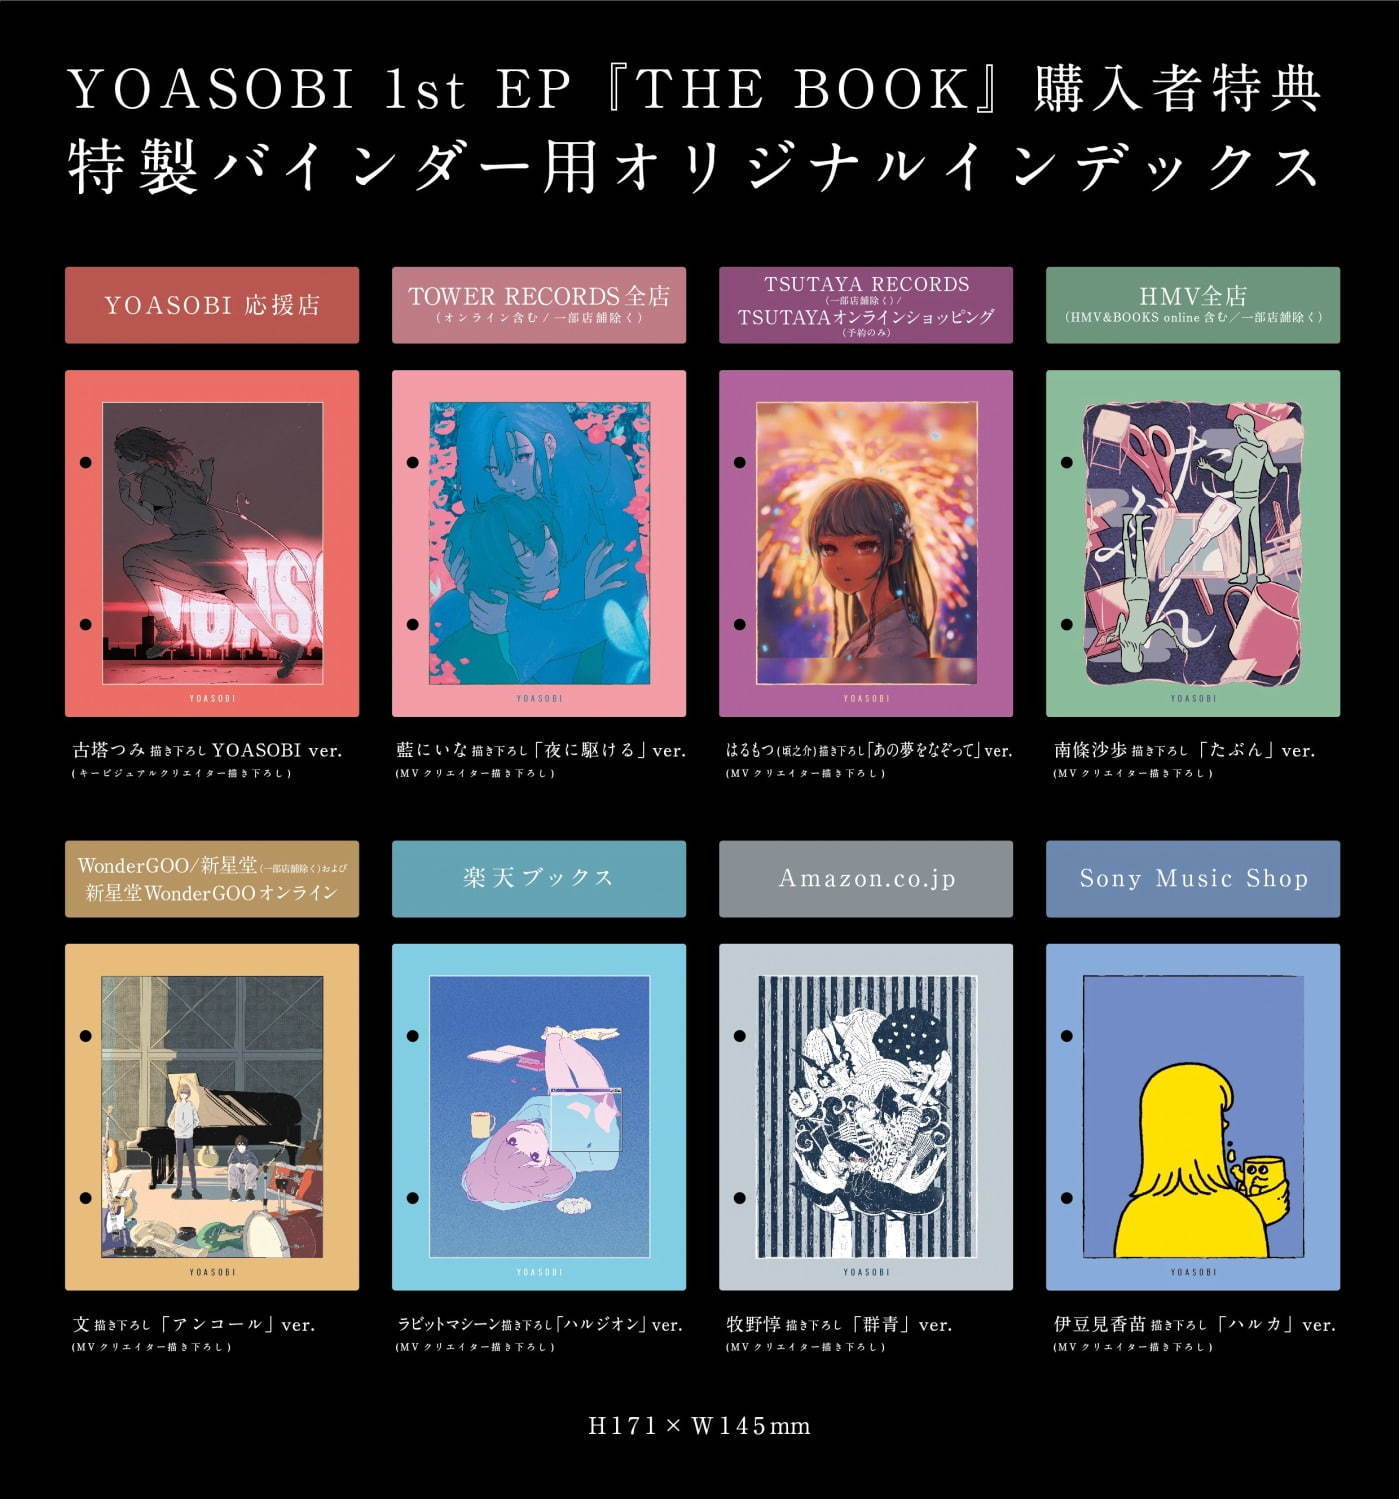 駆ける 夜 cd に YOASOBI、初のCDとなる1st EP『THE